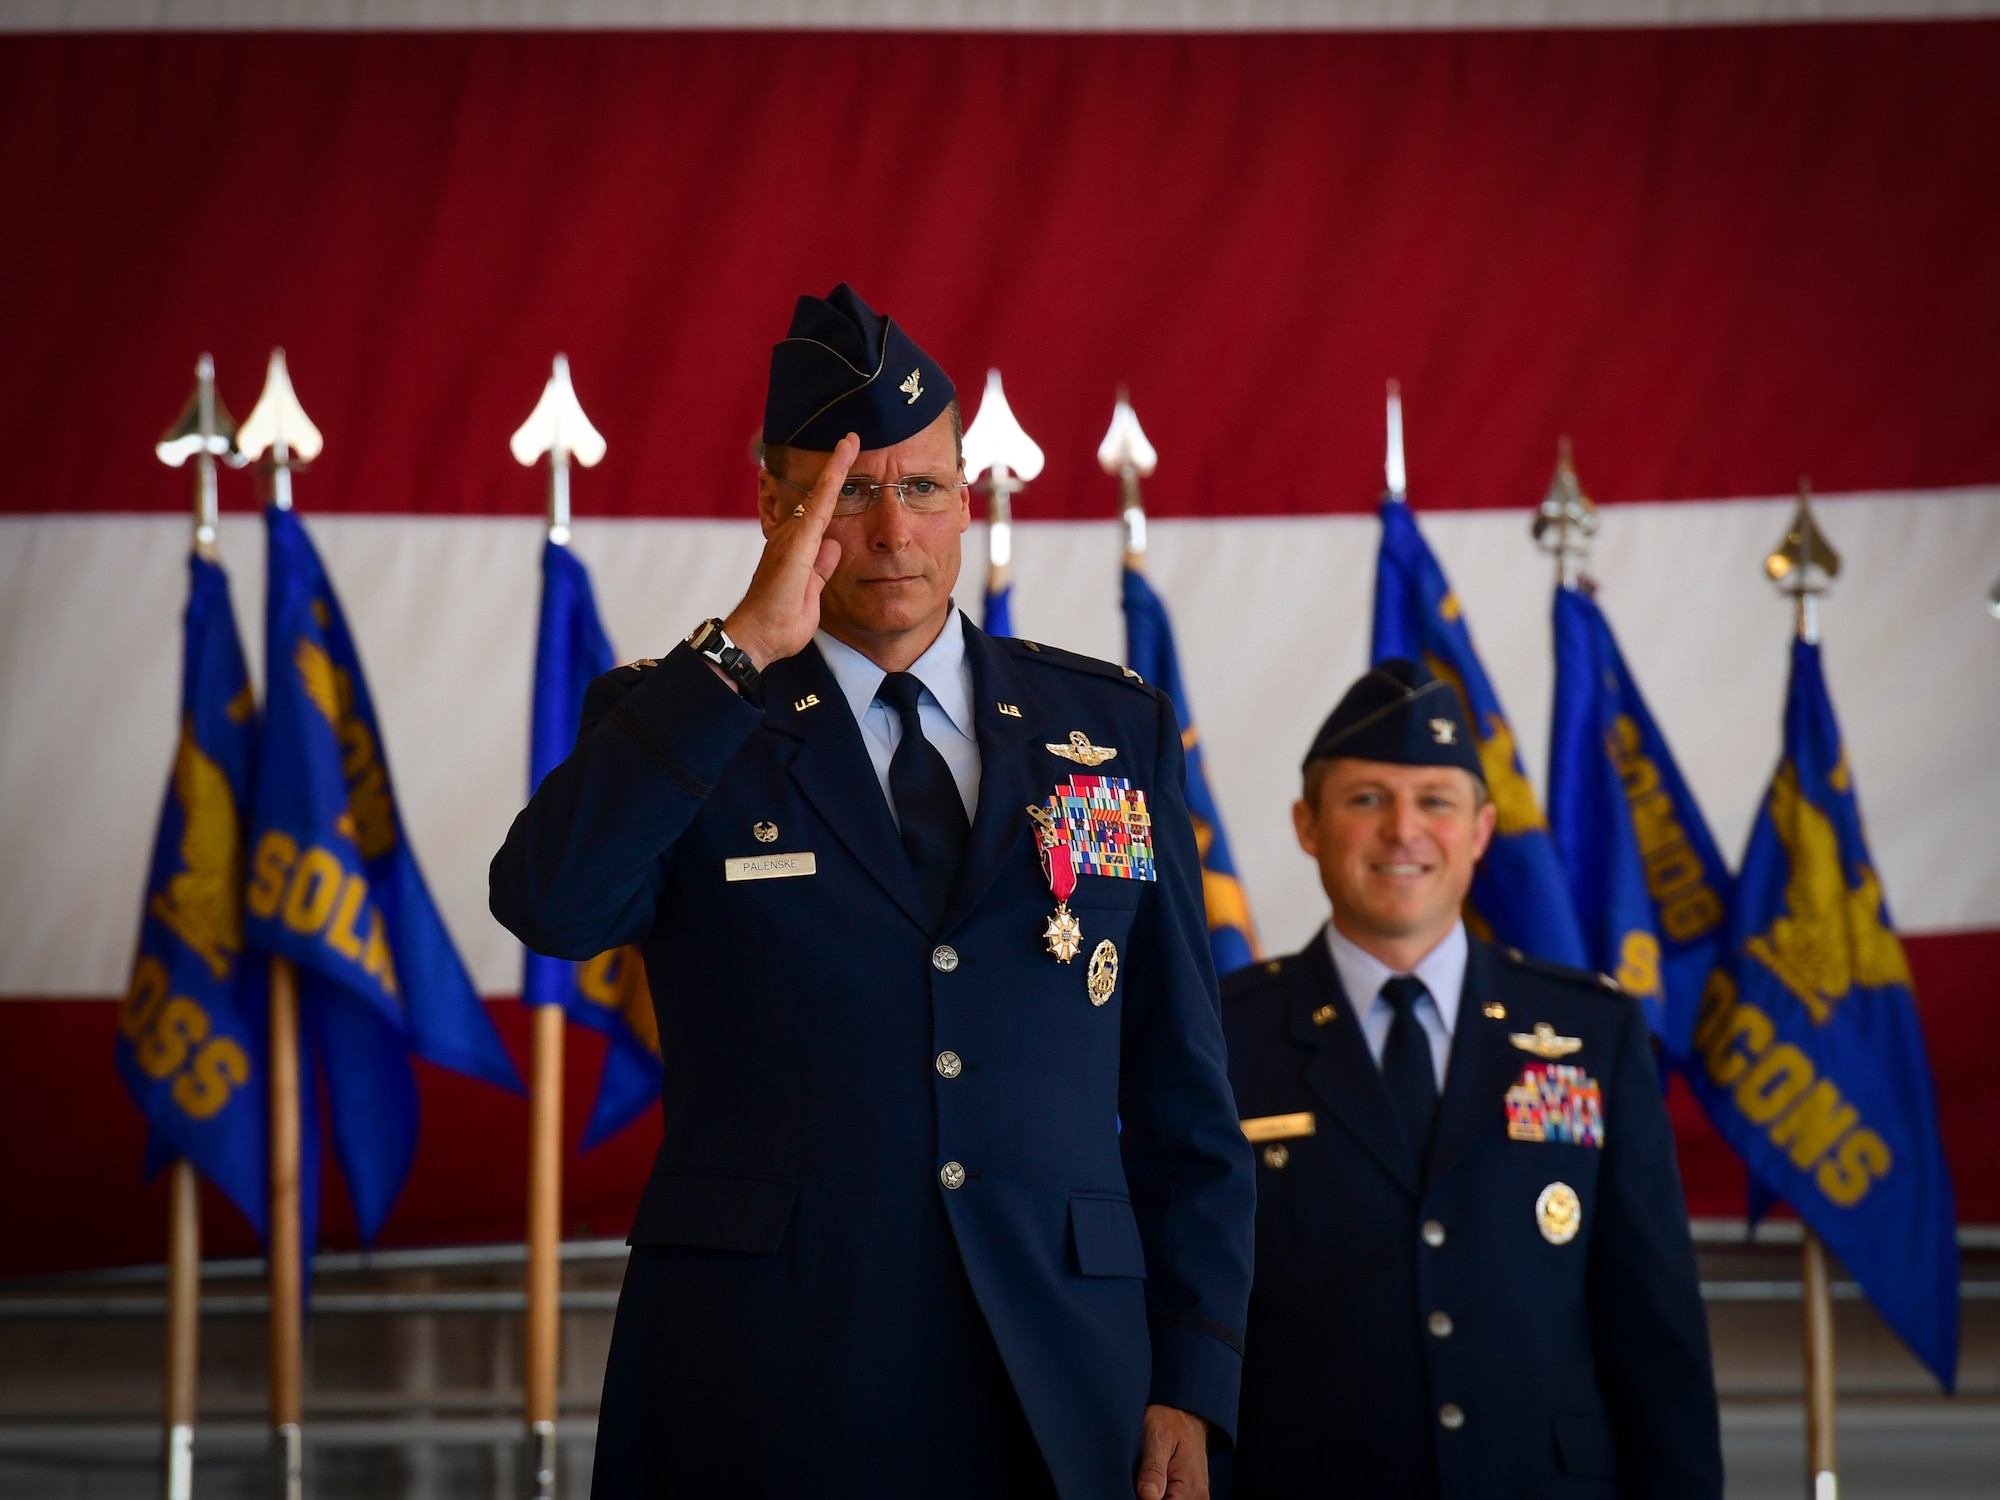 Air Commandos gather for the 1st Special Operations Wing change of command ceremony at Hurlburt Field, Fla., June 22, 2018. U.S. Air Force Col. Tom Palenske, outgoing commander of the 1st SOW, relinquished command to U.S. Air Force Col. Michael Conley, former vice commander of the 27th Special Operations Wing, Cannon Air Force Base, New Mexico, after leading the wing for approximately three years as both the vice and wing commander.